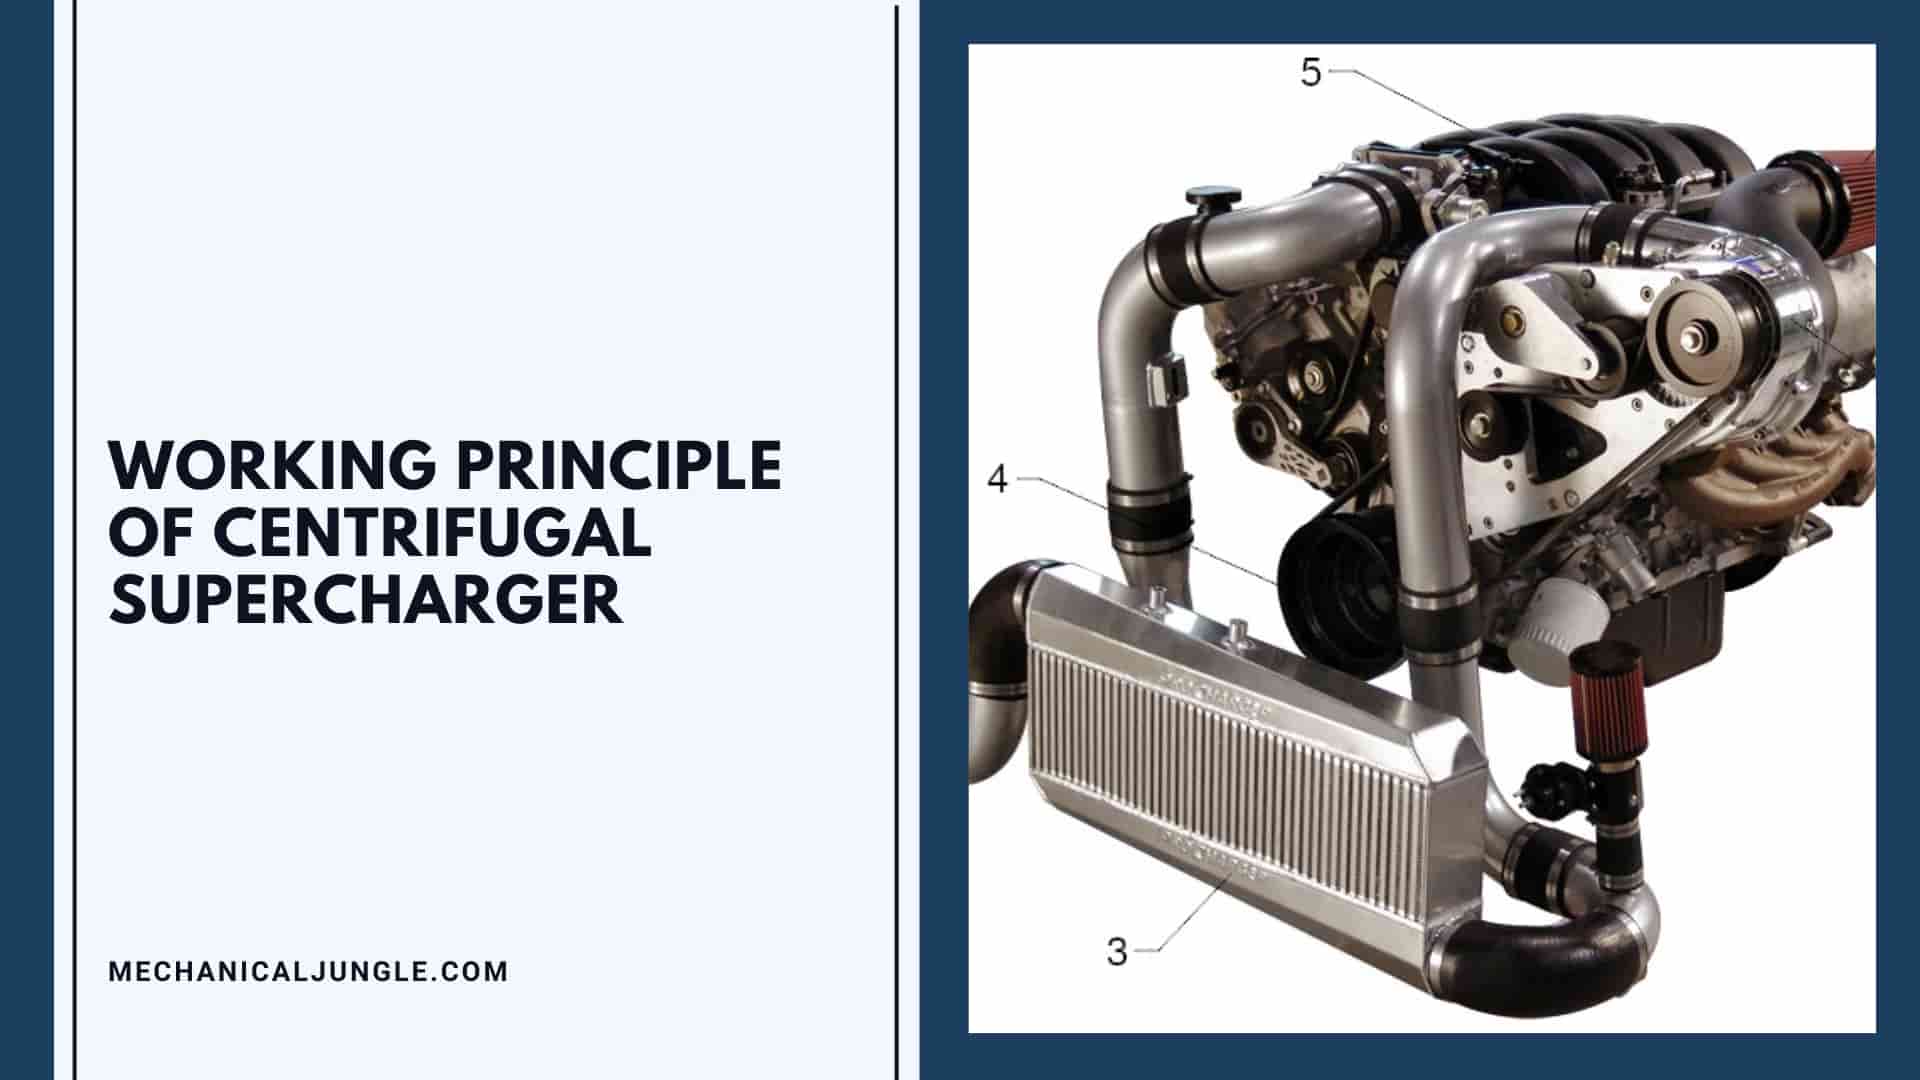 Working Principle of Centrifugal Supercharger